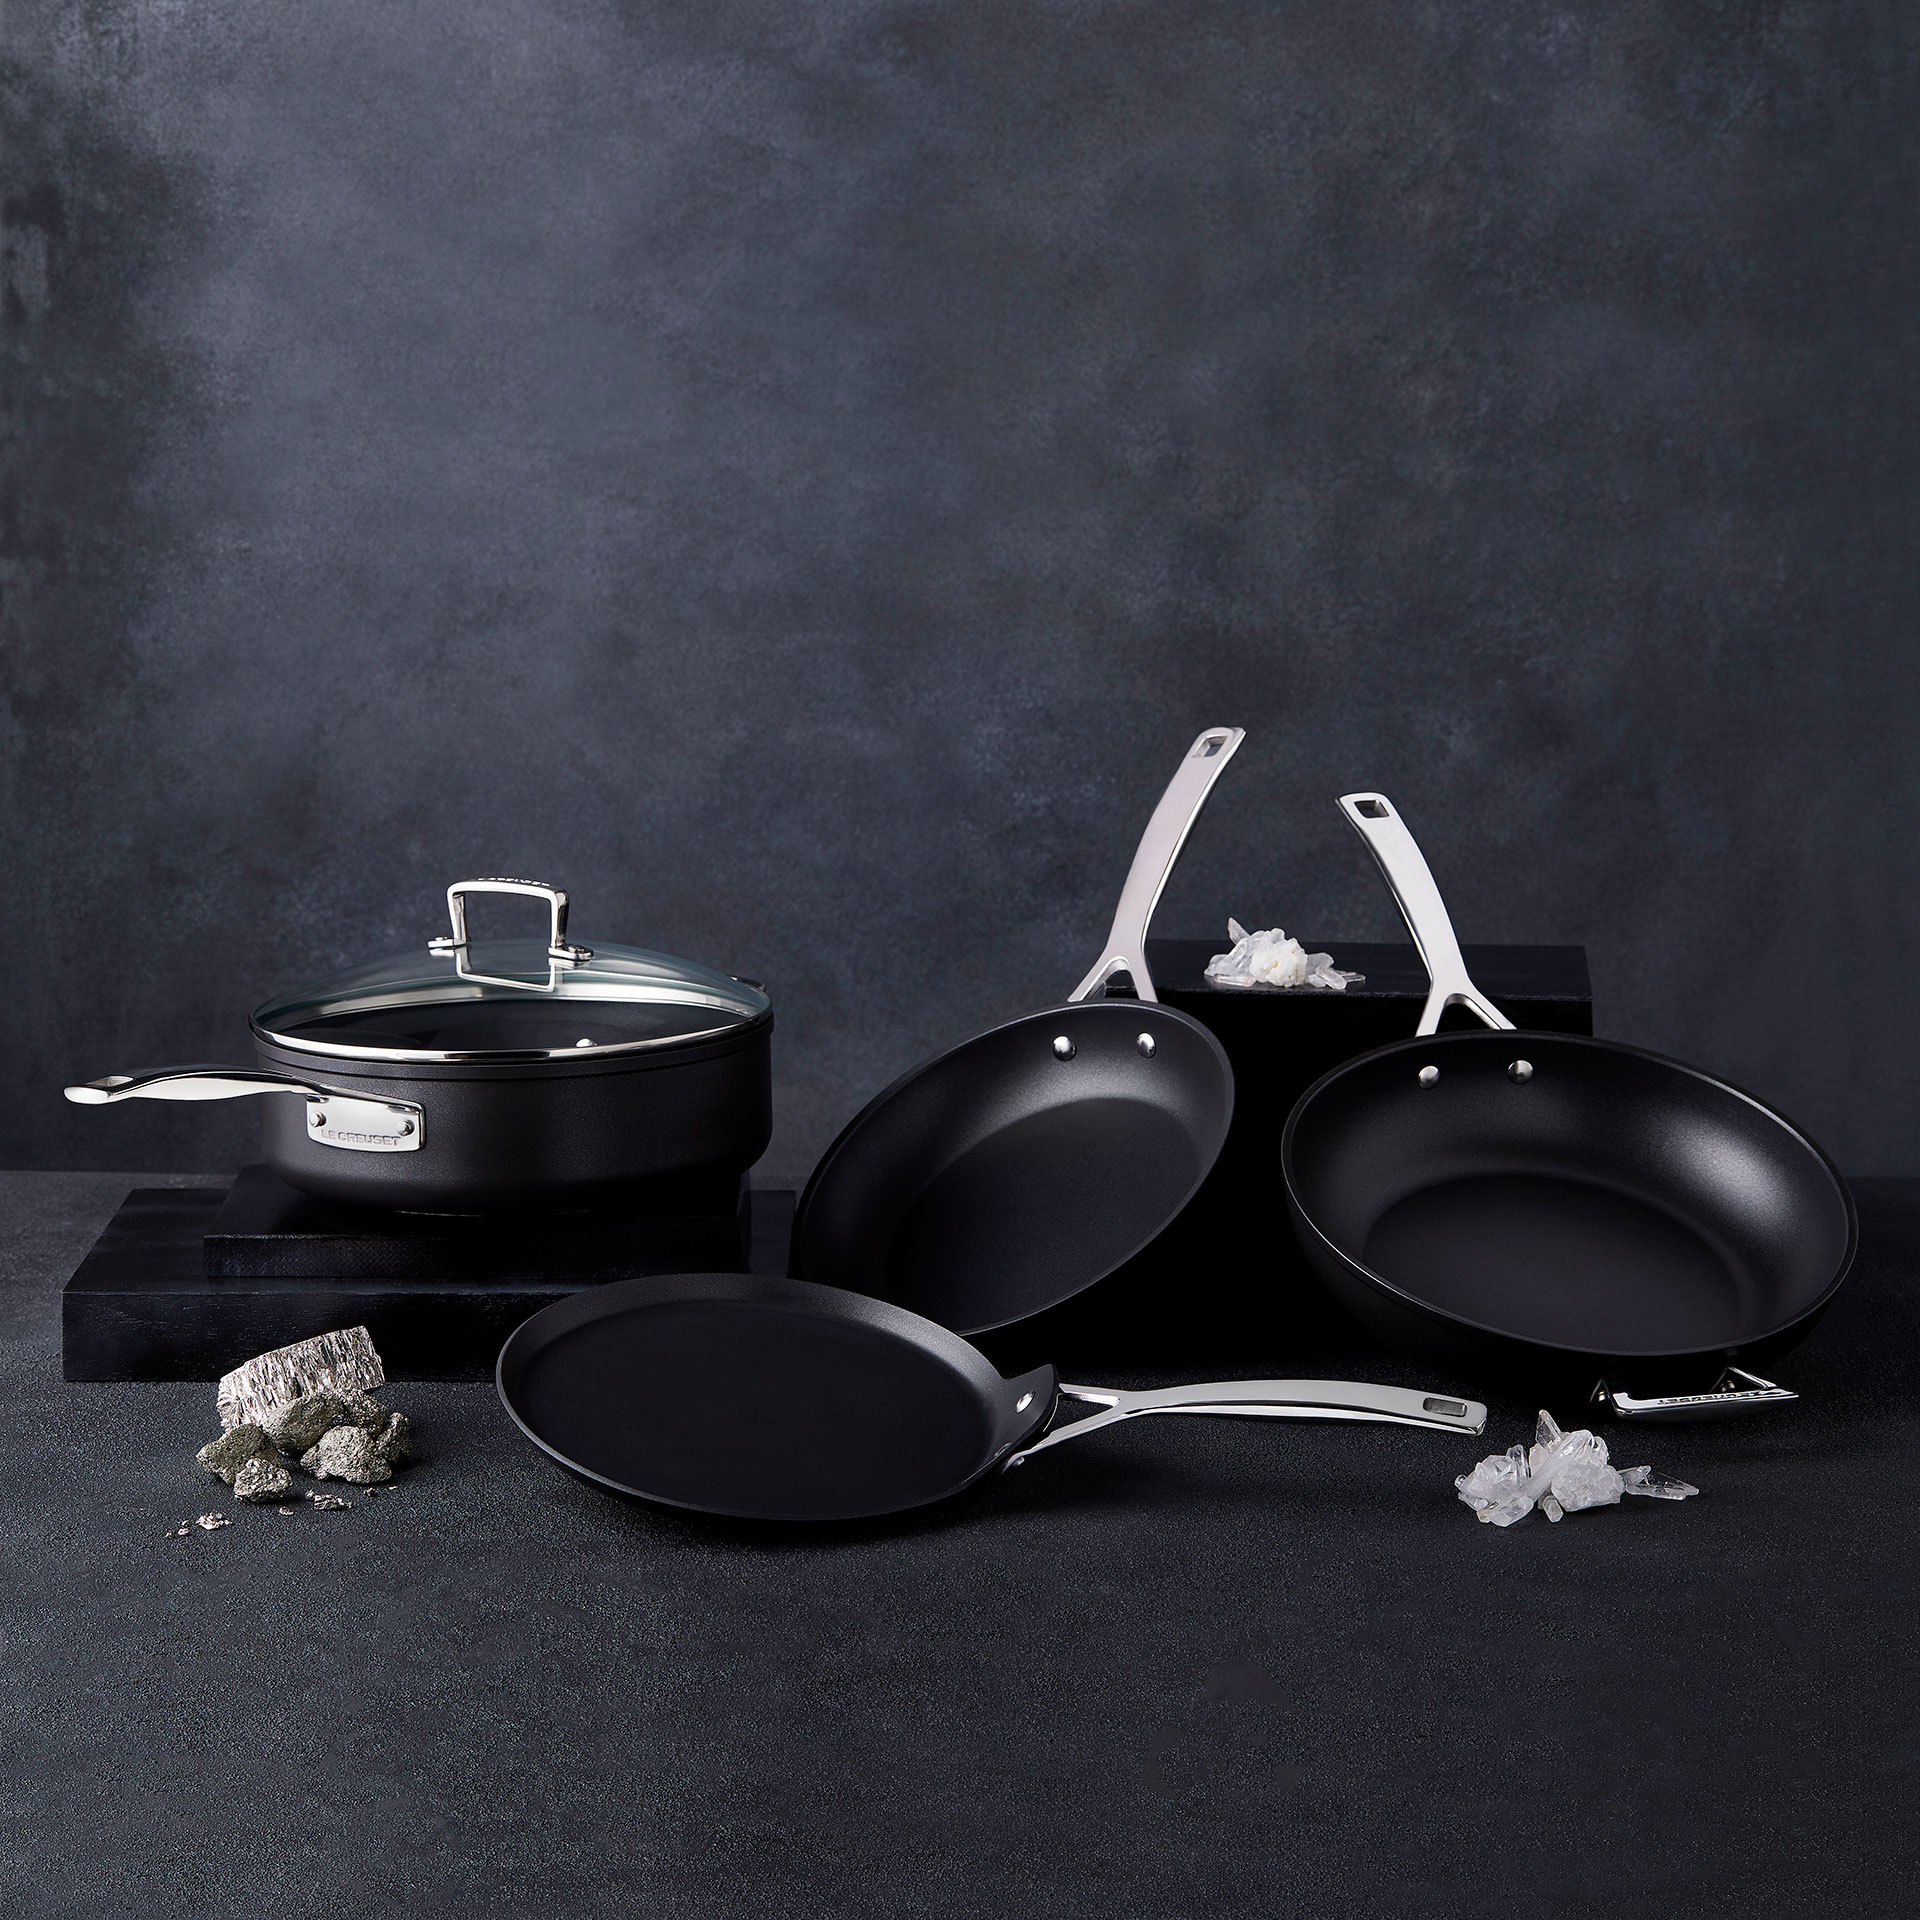 Le Creuset Toughened Non-Stick Range. Now 4 x stronger. Le Creuset's Best-Ever Non-Stick Coating. Tested. Trusted. Guaranteed for Life.